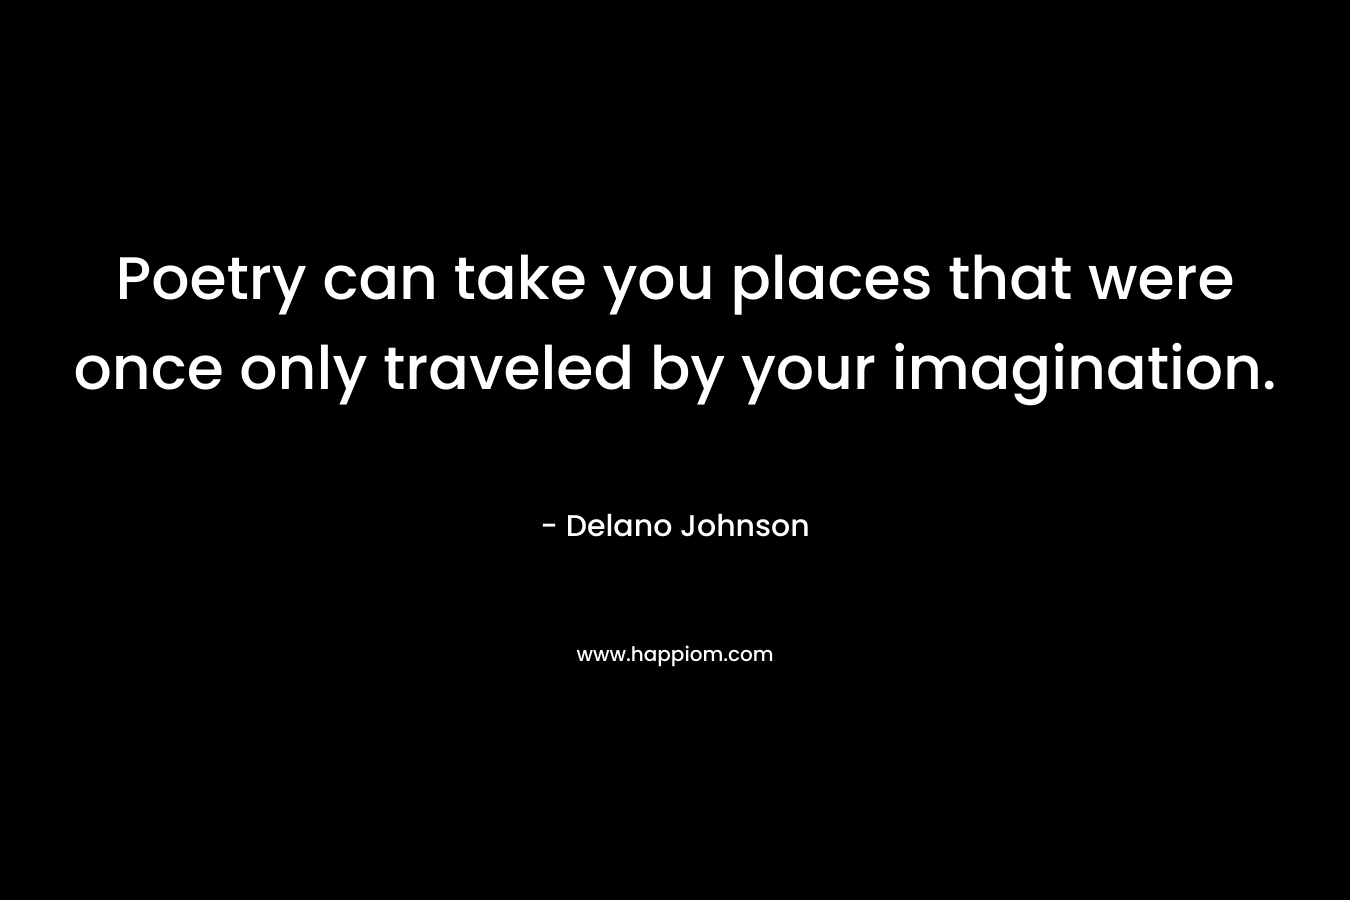 Poetry can take you places that were once only traveled by your imagination. – Delano Johnson